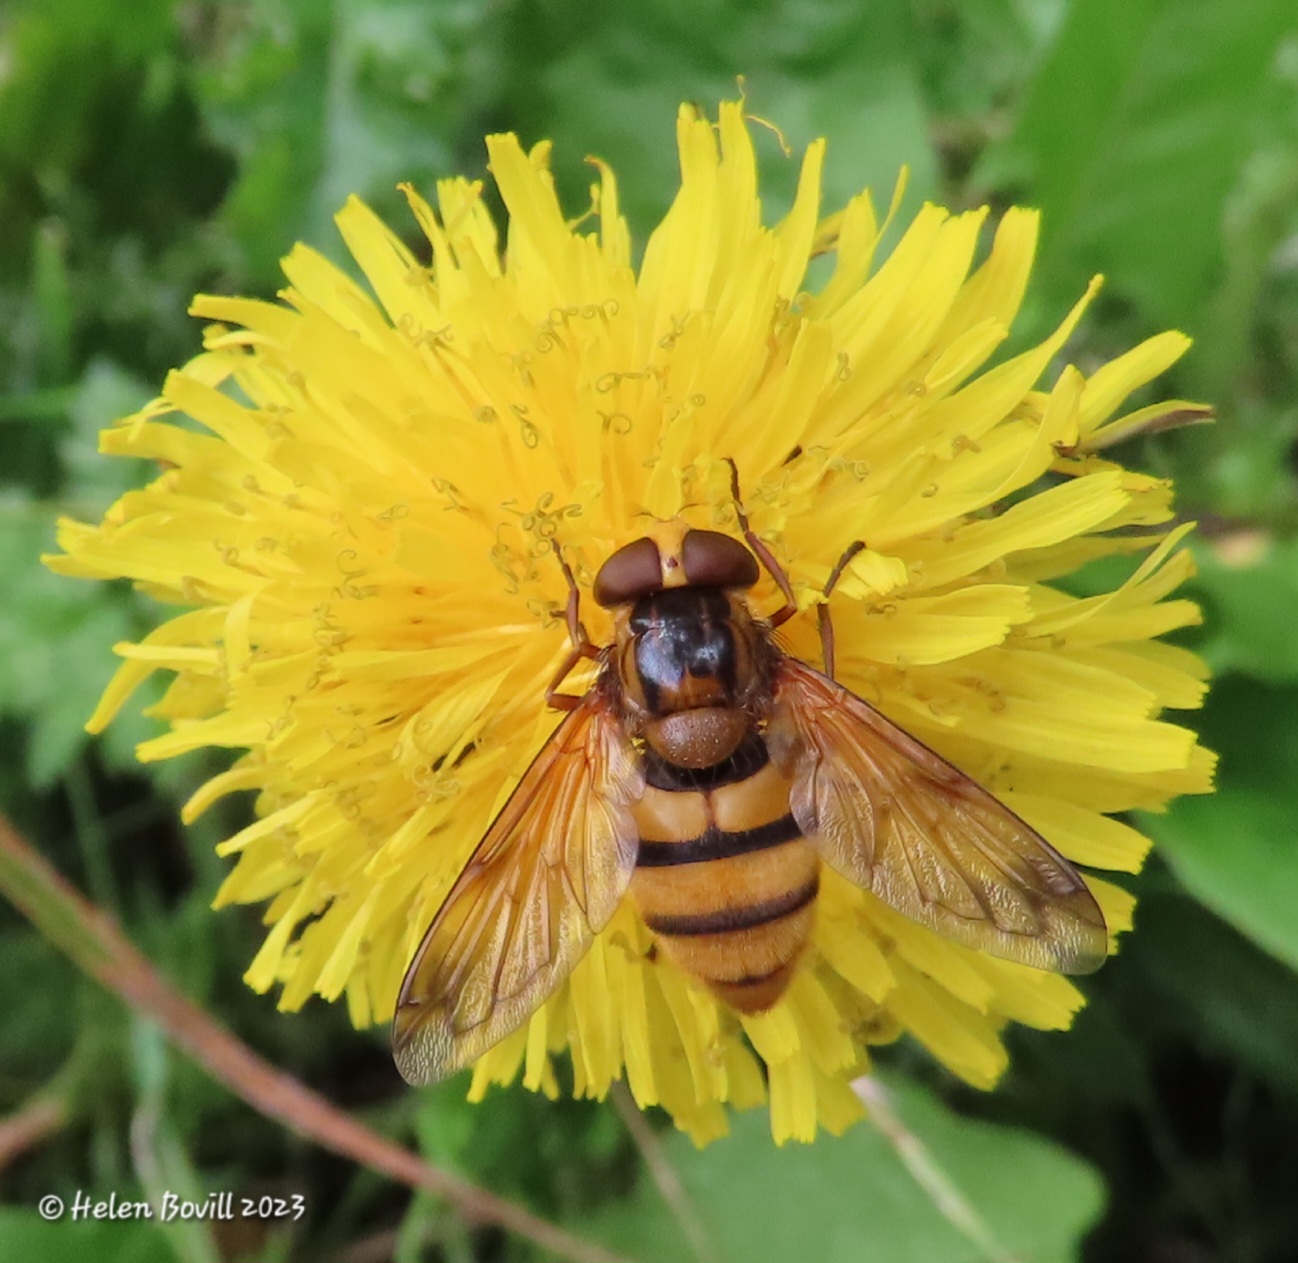 Hornet-mimic Hoverfly on a Dandelion